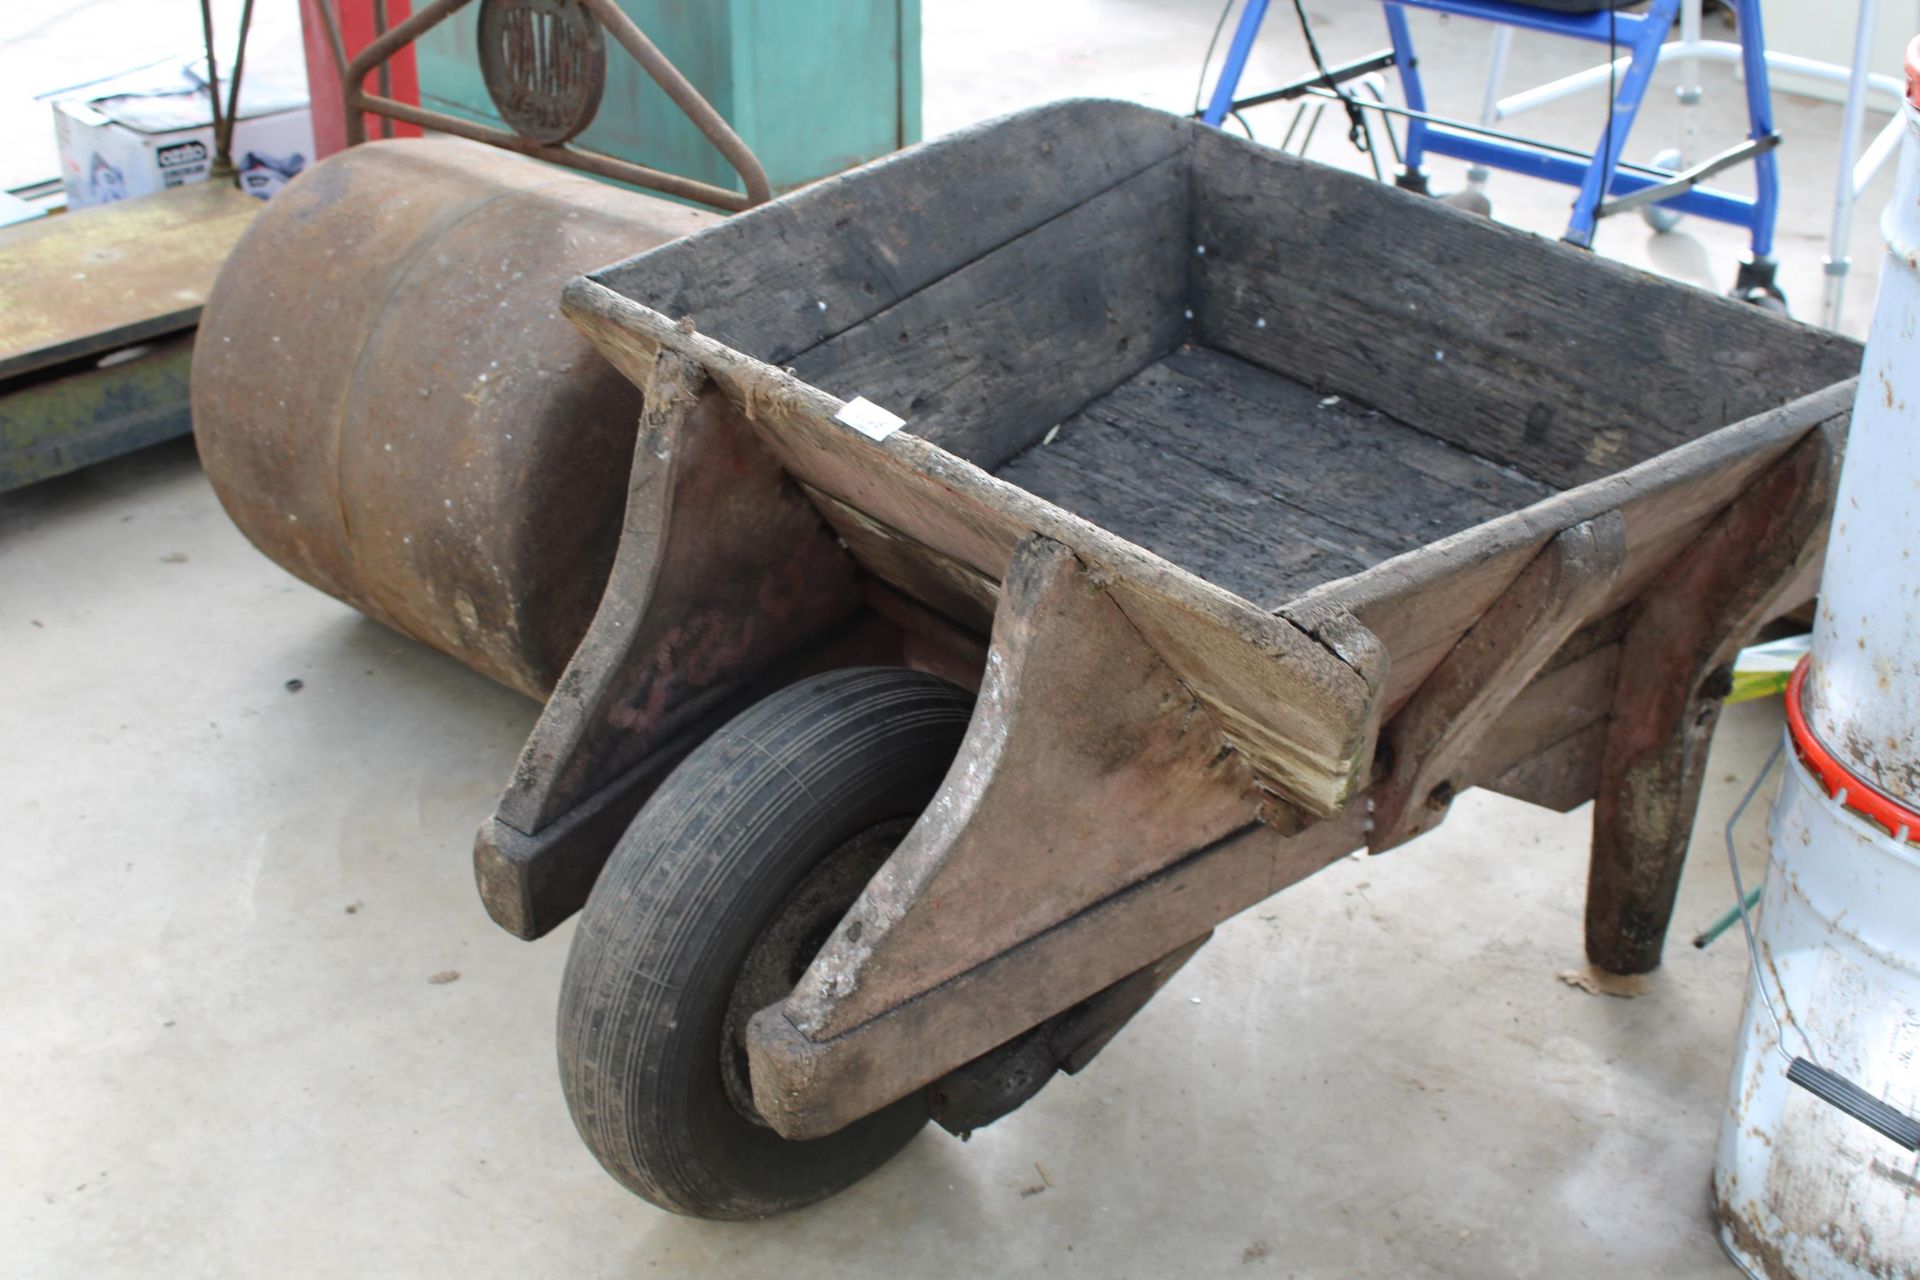 A WOODENGARDEN WHEEL BARROW PLANTER WITH RUBBER TYRE - Image 3 of 3